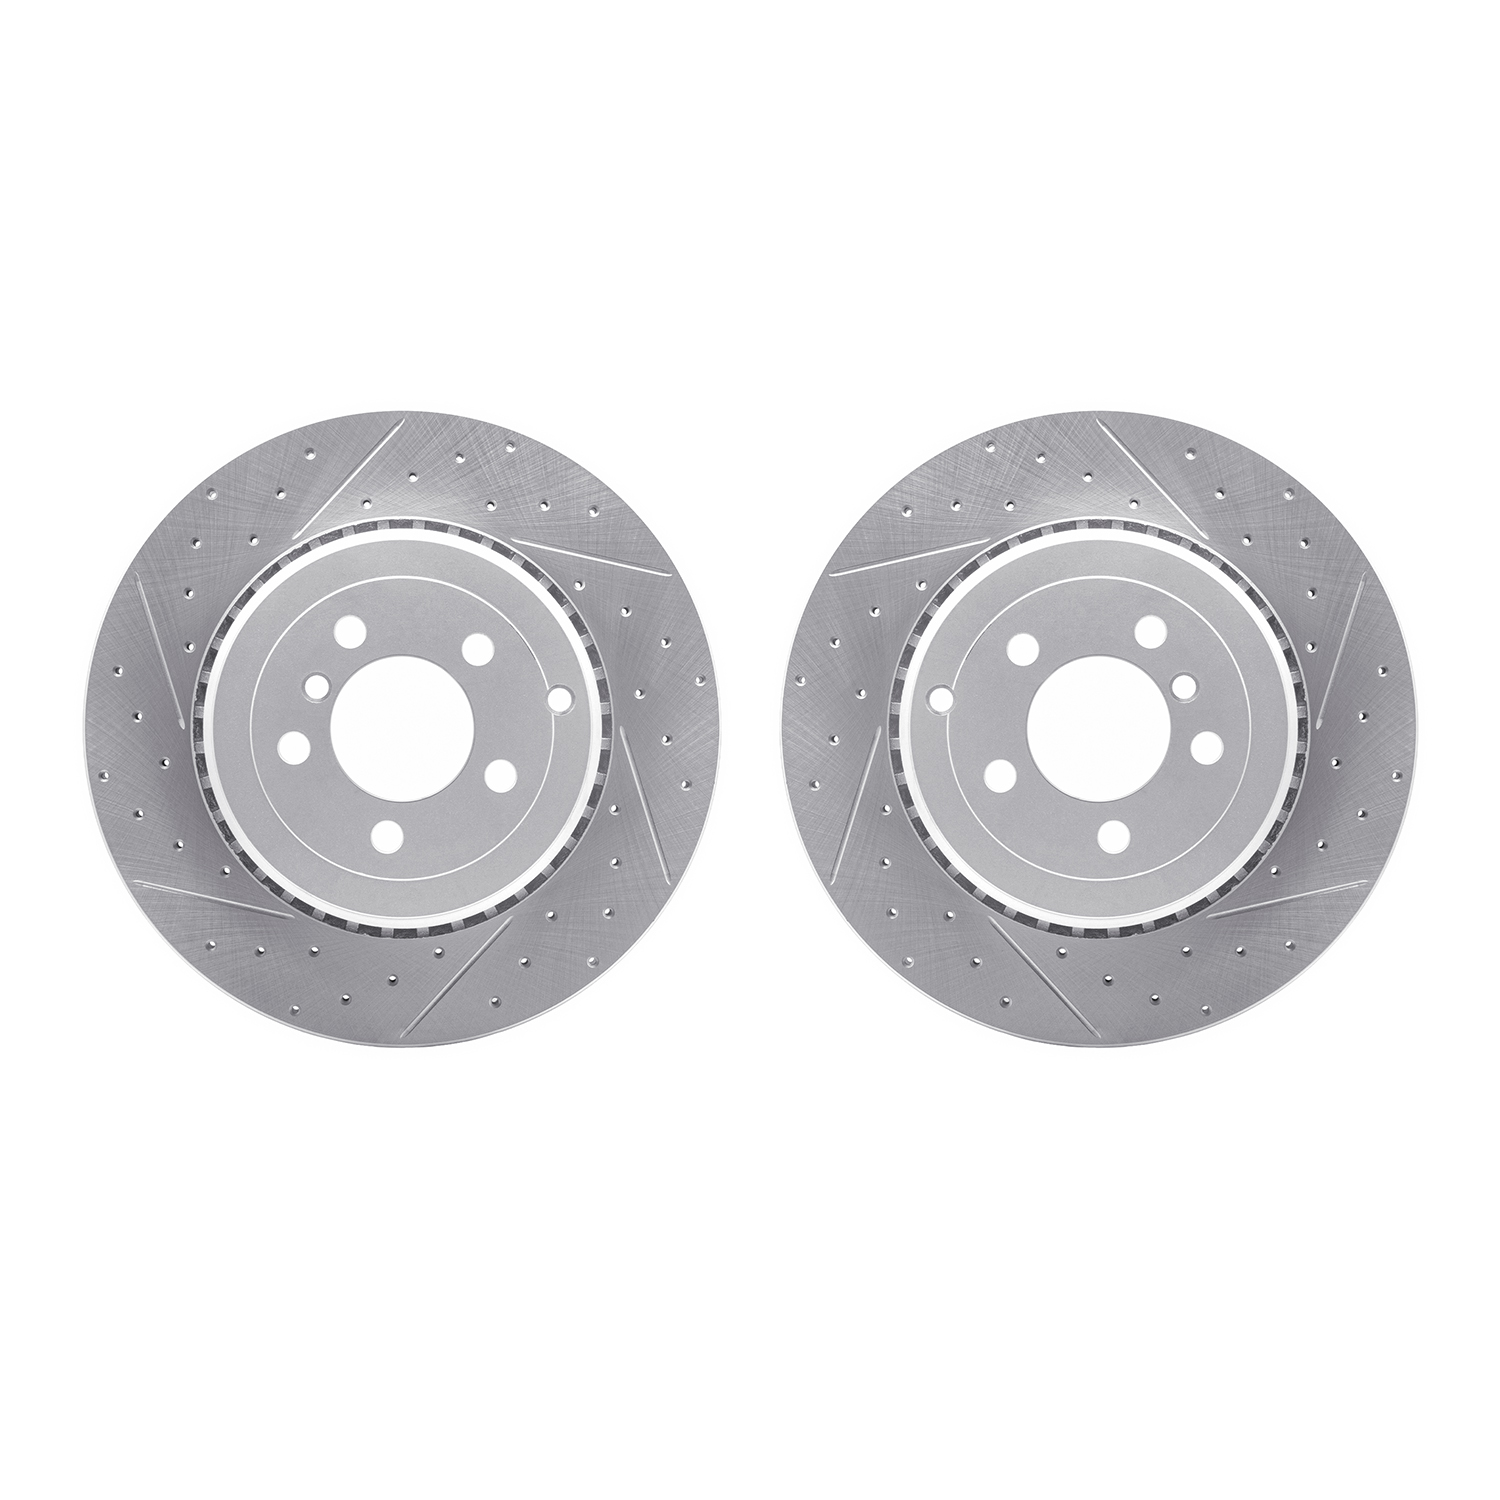 2002-11029 Geoperformance Drilled/Slotted Brake Rotors, 2010-2012 Land Rover, Position: Rear